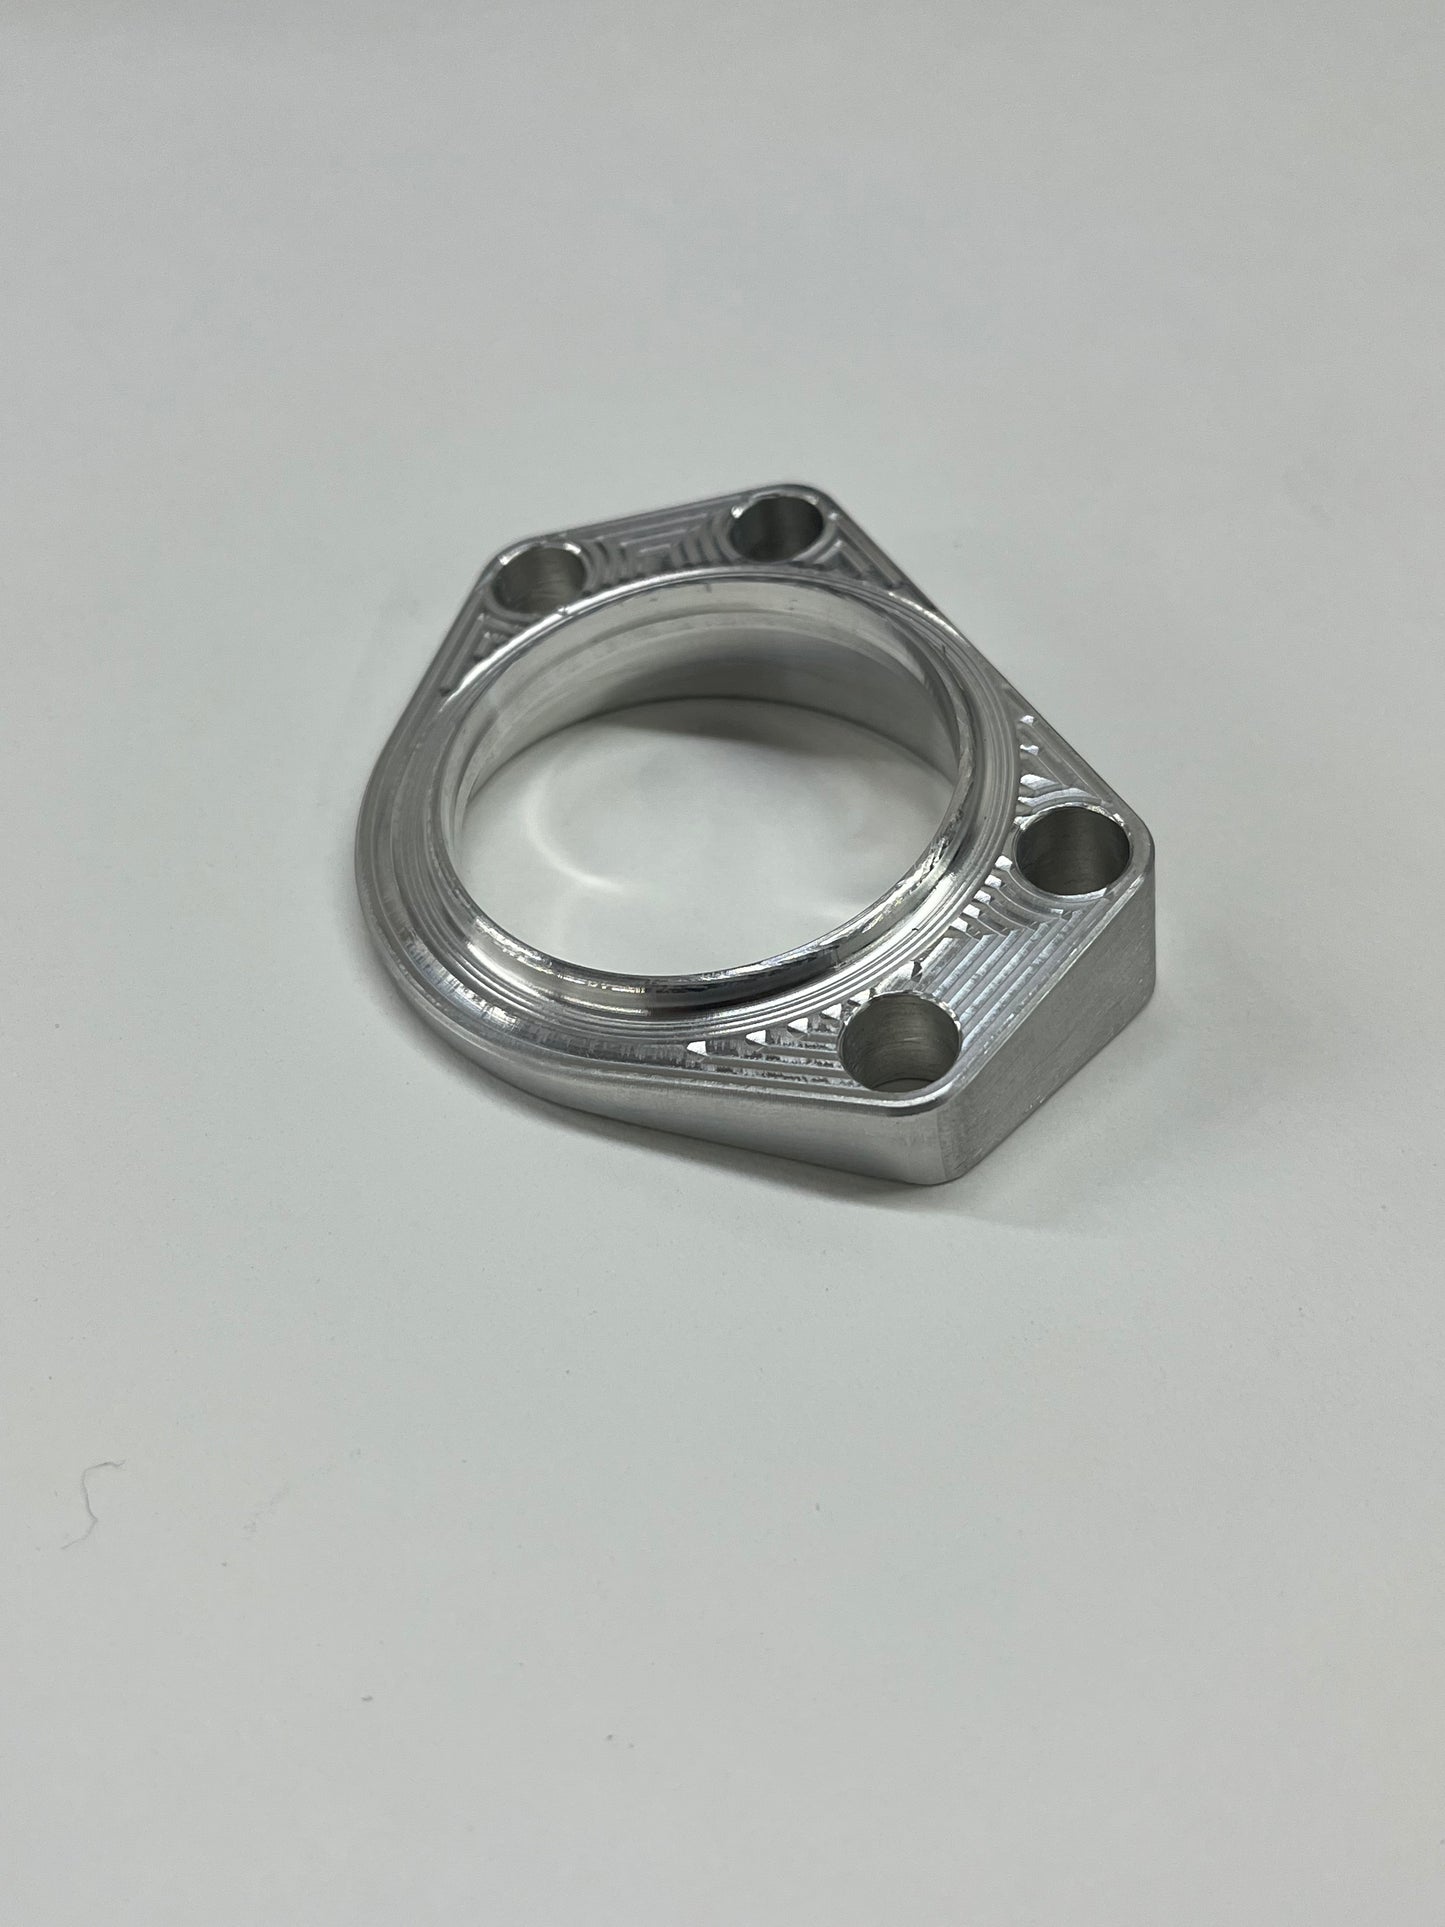 Billet Ball Joint Spacers / Angle Shims (Pair)